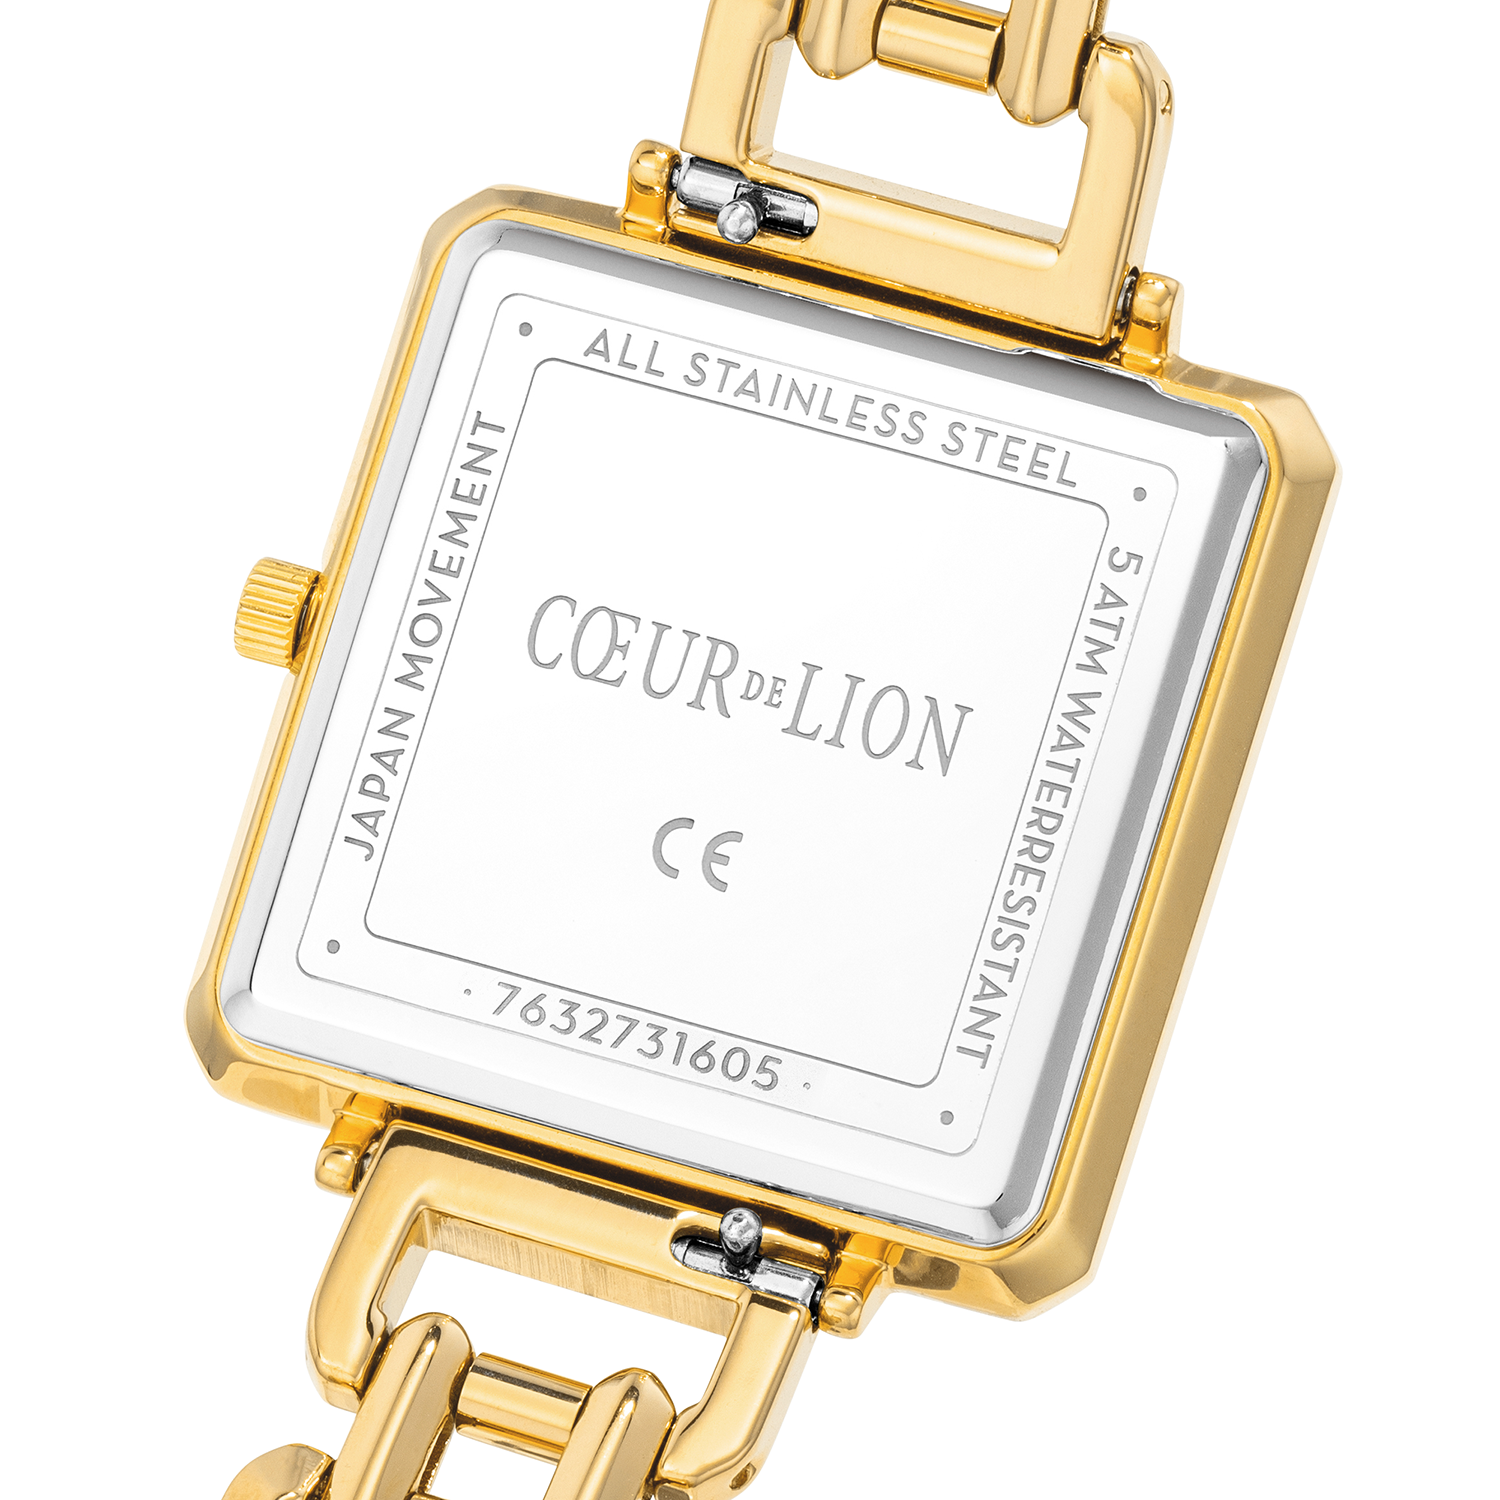 White Mother of Pearl & Gold Iconic Cube Watch 7632_74_1643